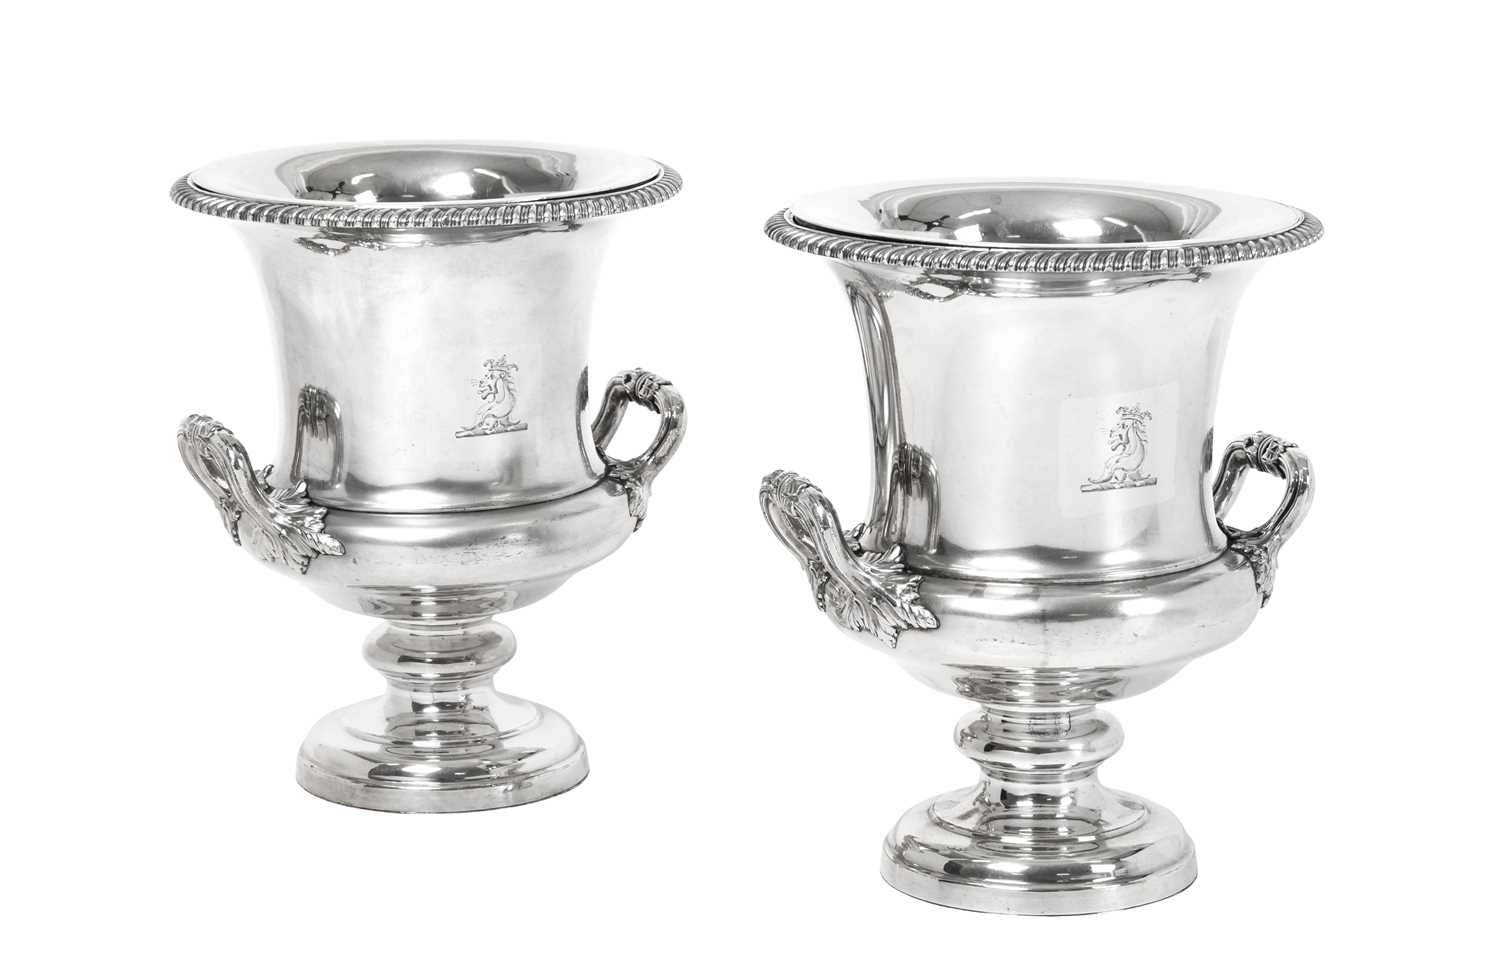 A Pair of George III Old Sheffield Plate Wine-Coolers, Collars and Liners, Apparently Unmarked, Fir